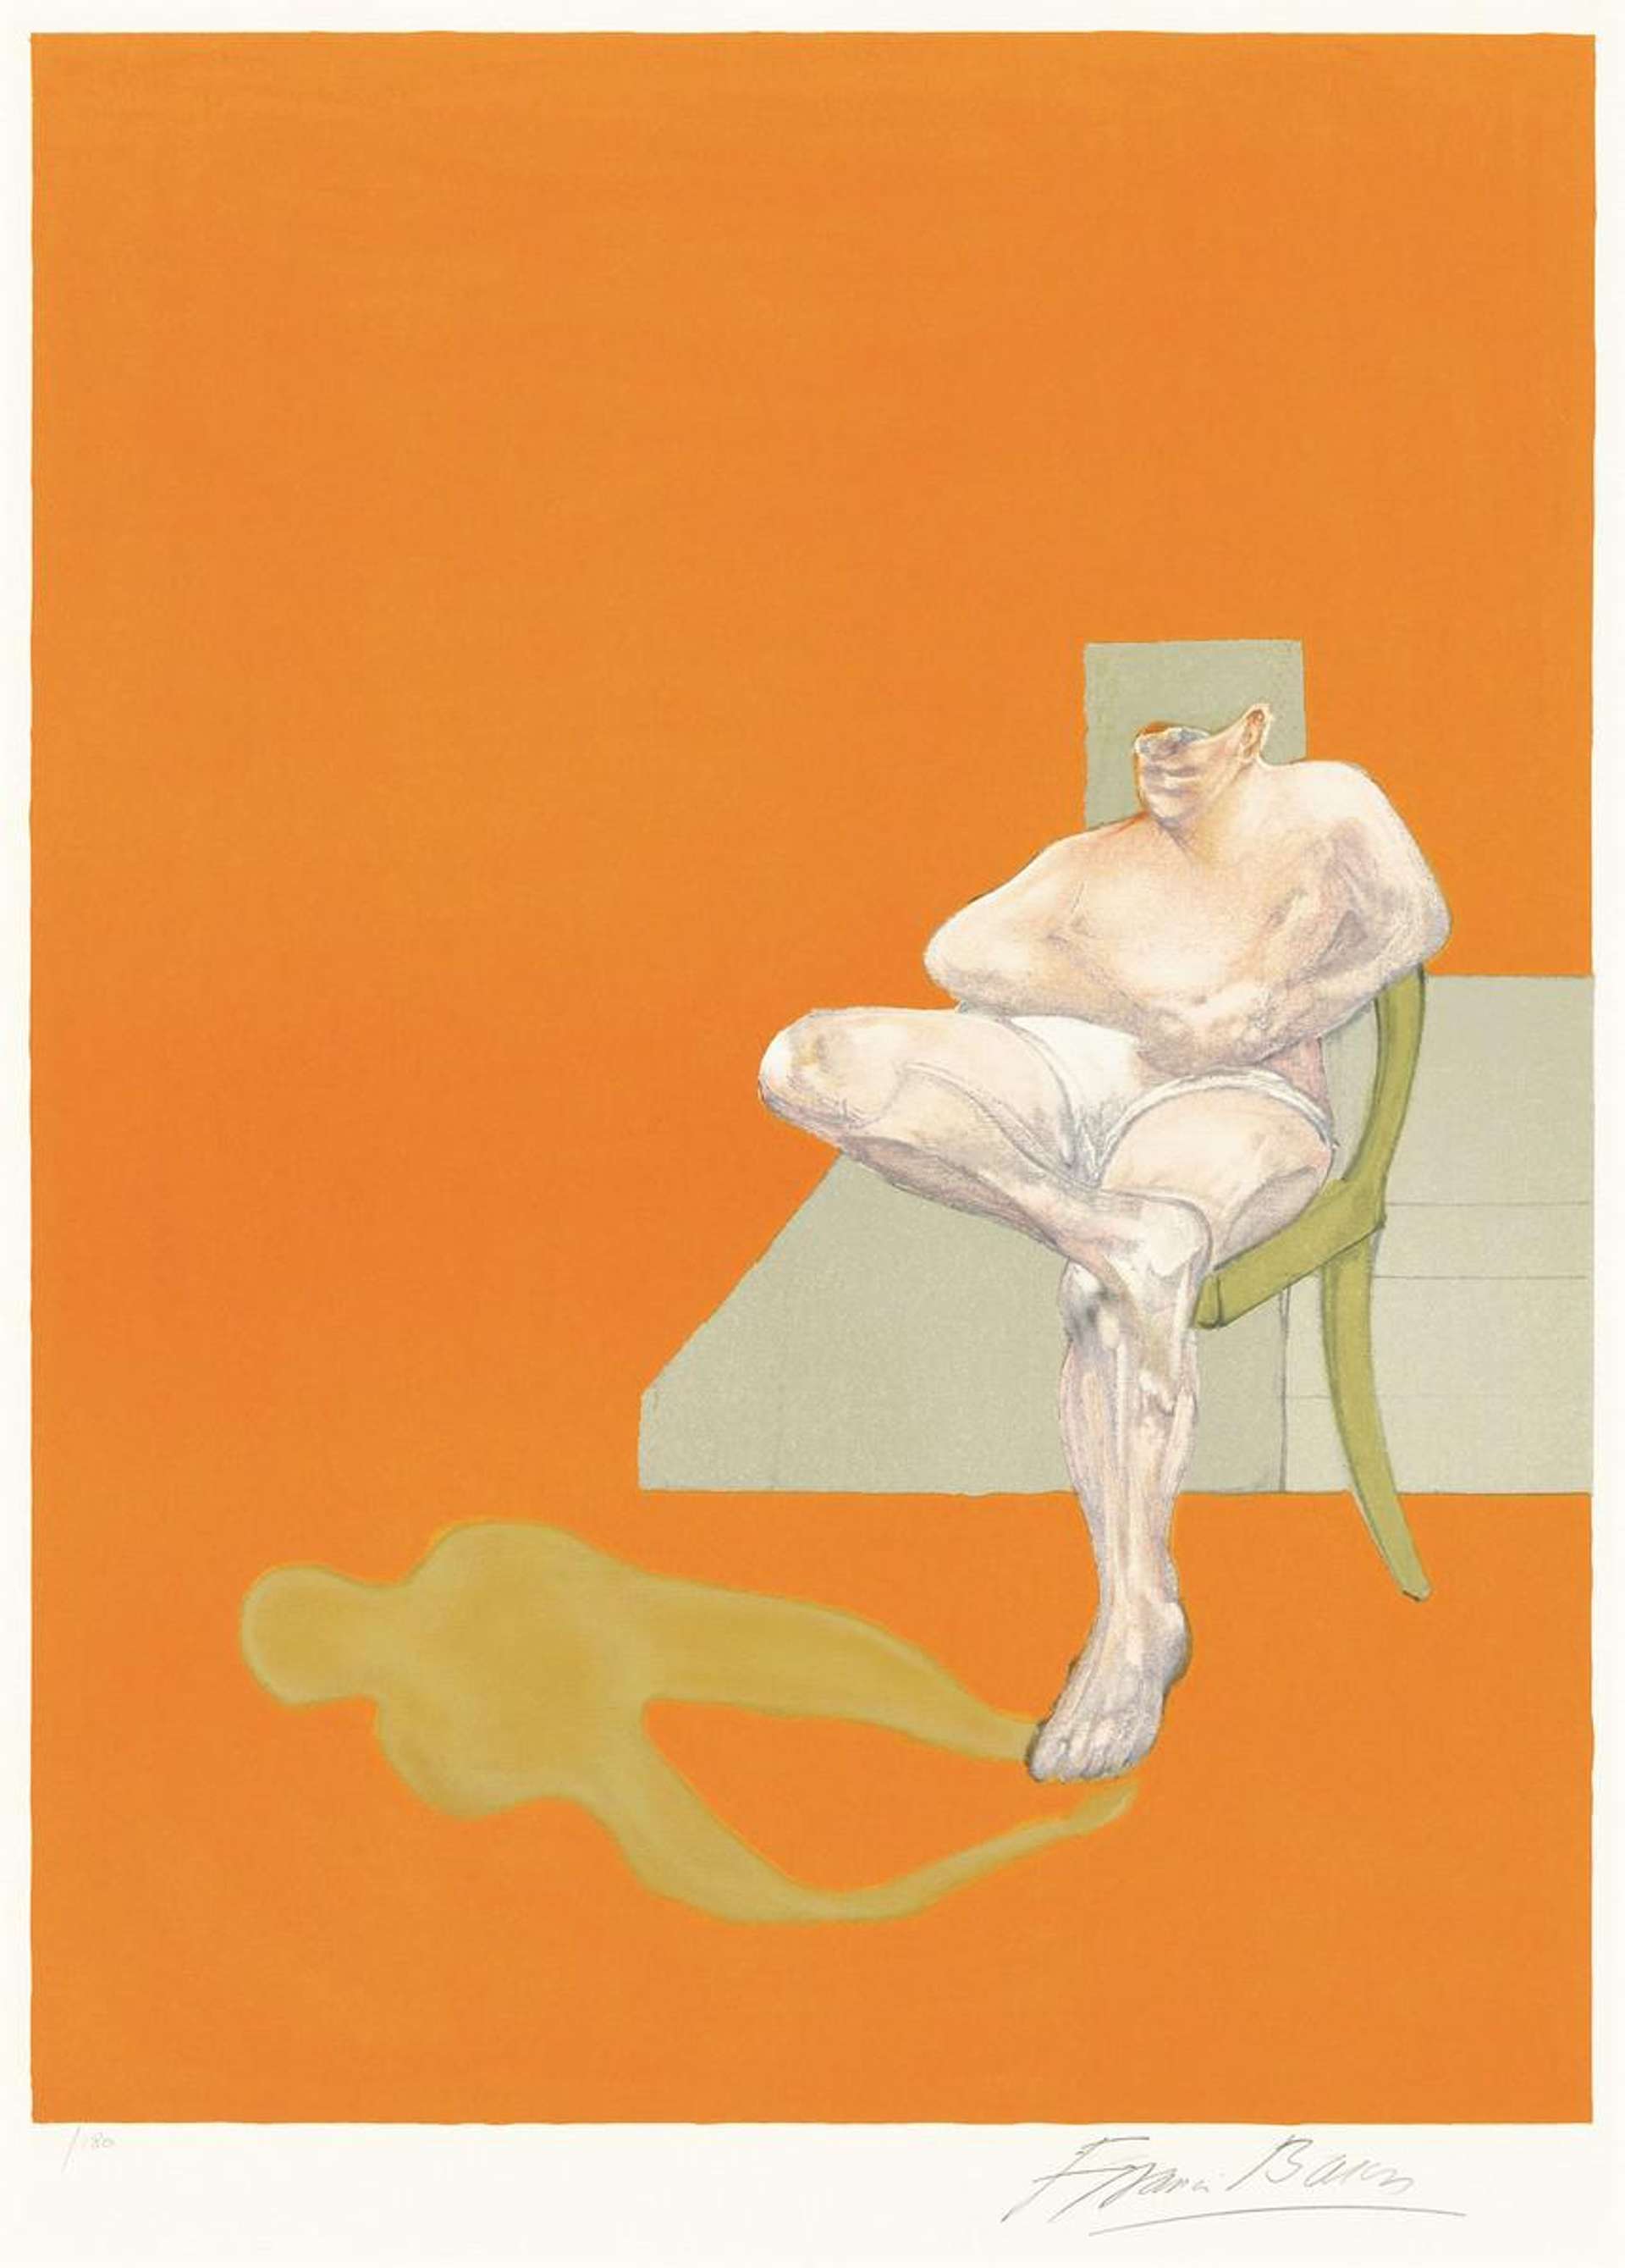 A man sat in a chair with the top half of his head missing and his shadow on the floor on an orange background